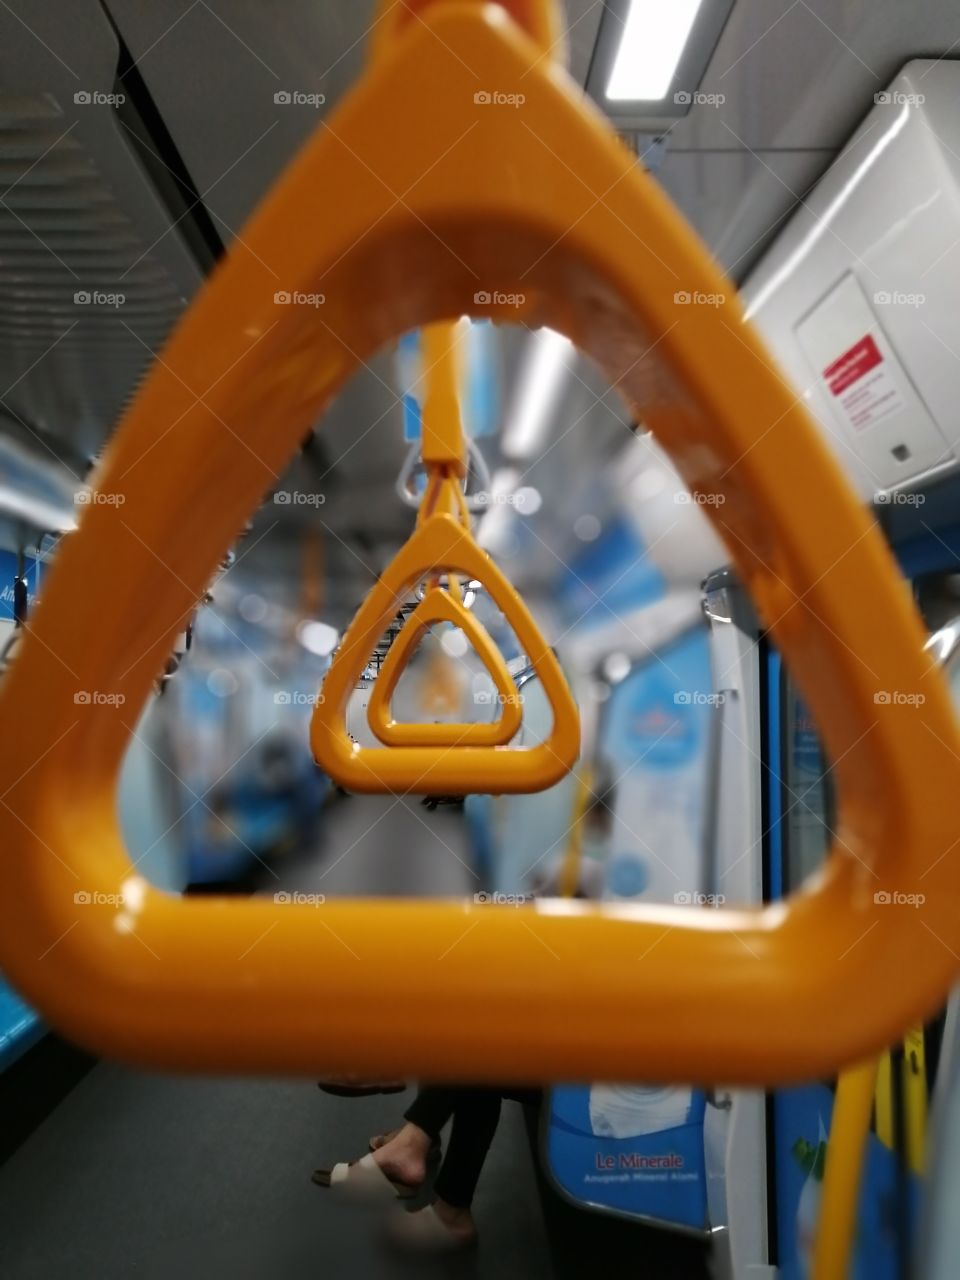 Stay in position when using public transport with a handle on the bus